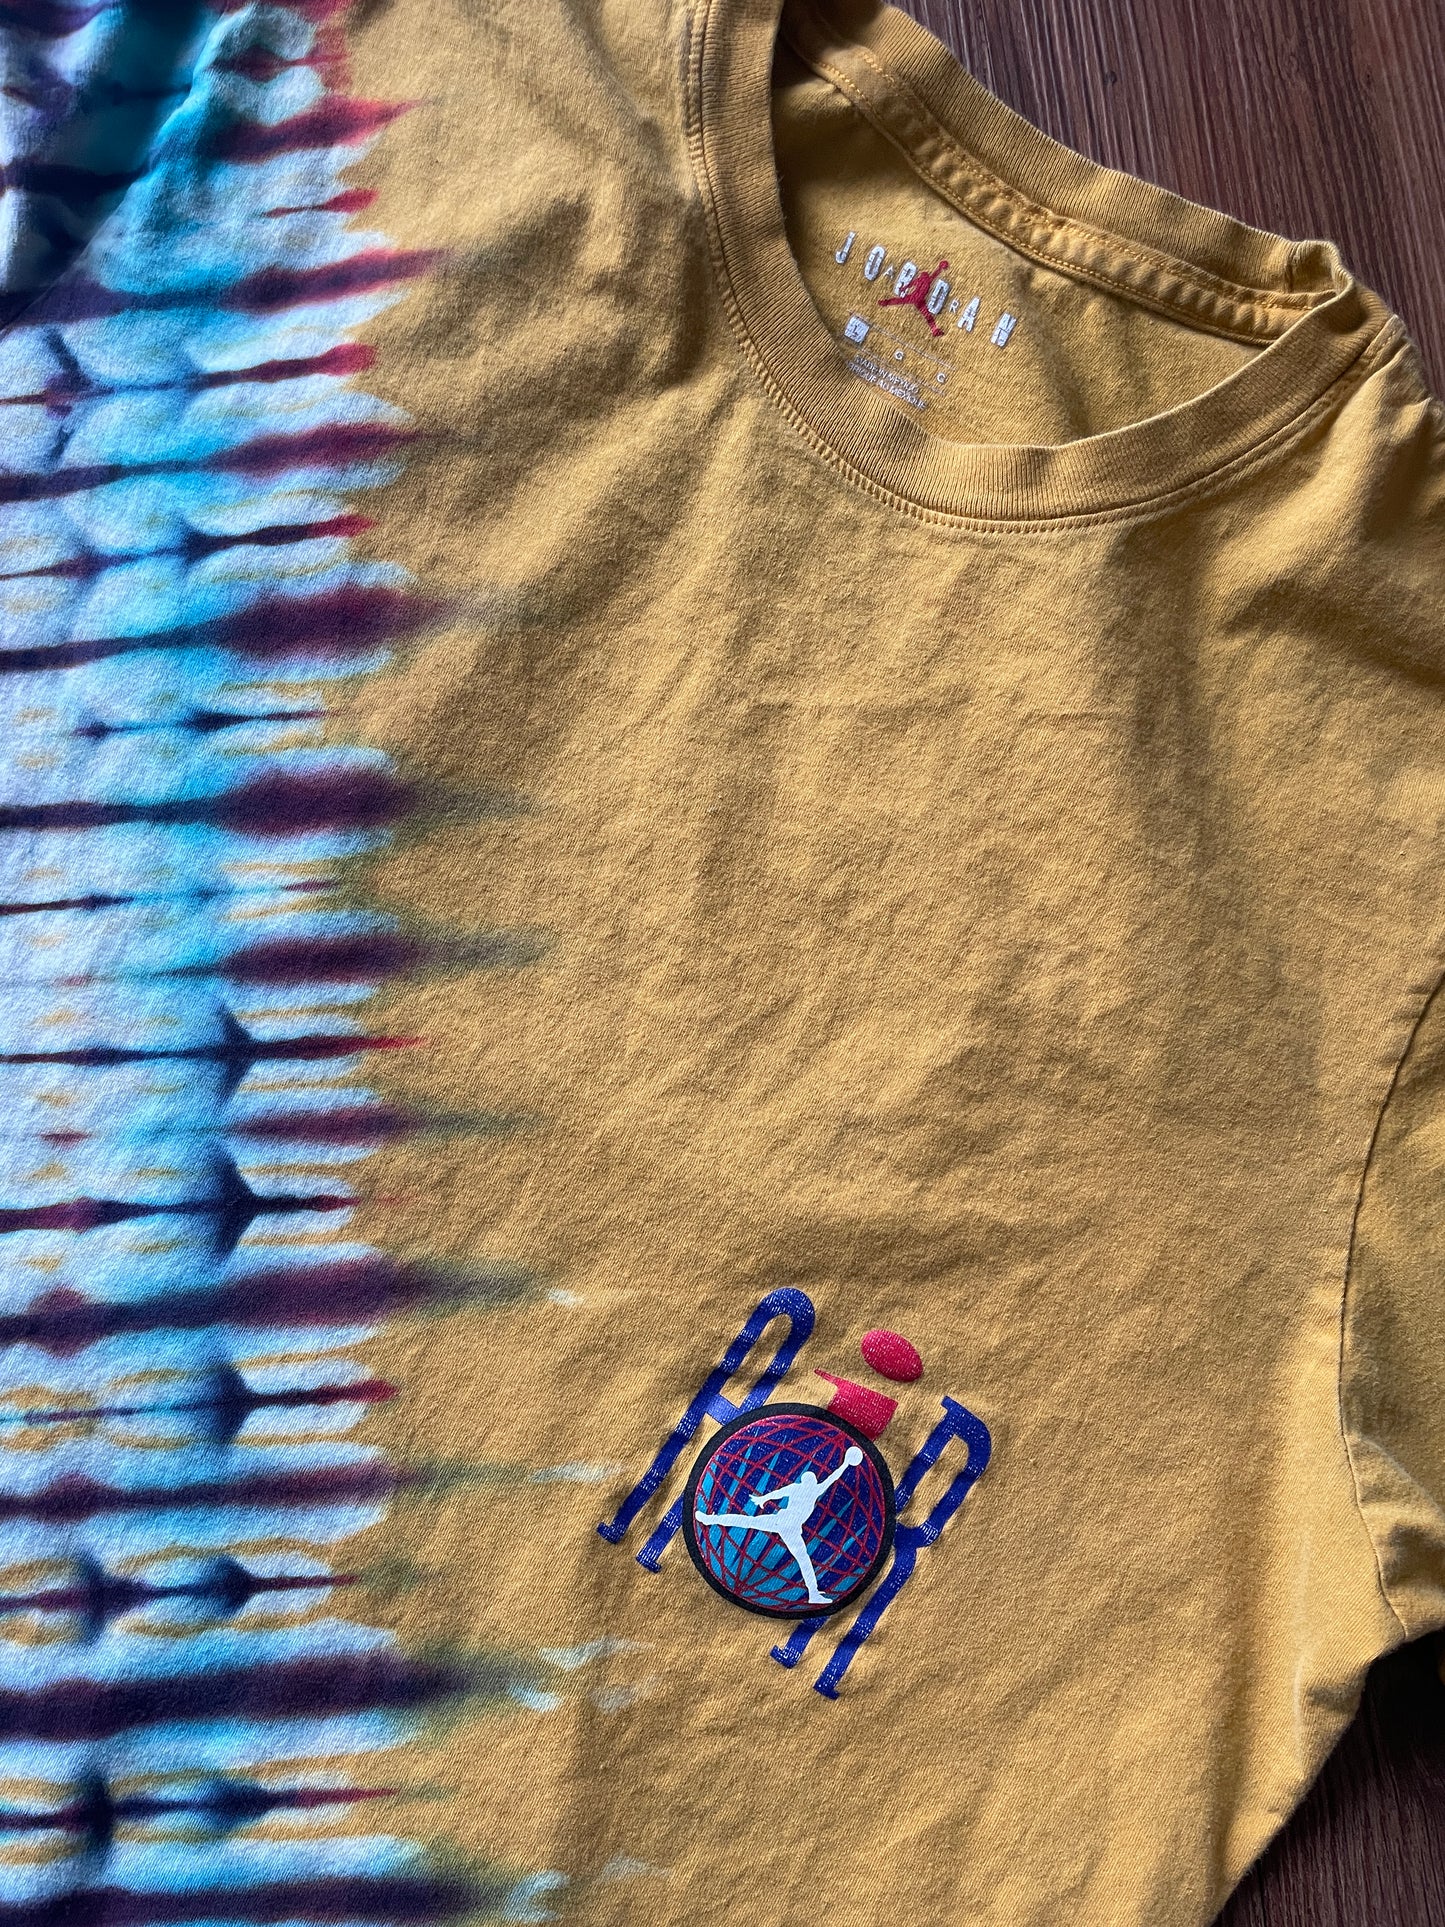 LARGE Men’s Vintage 90s Air Jordan Handmade Tie Dye T-Shirt | One-Of-a-Kind Yellow, Red, and Blue Pleated Bleach Dye Short Sleeve